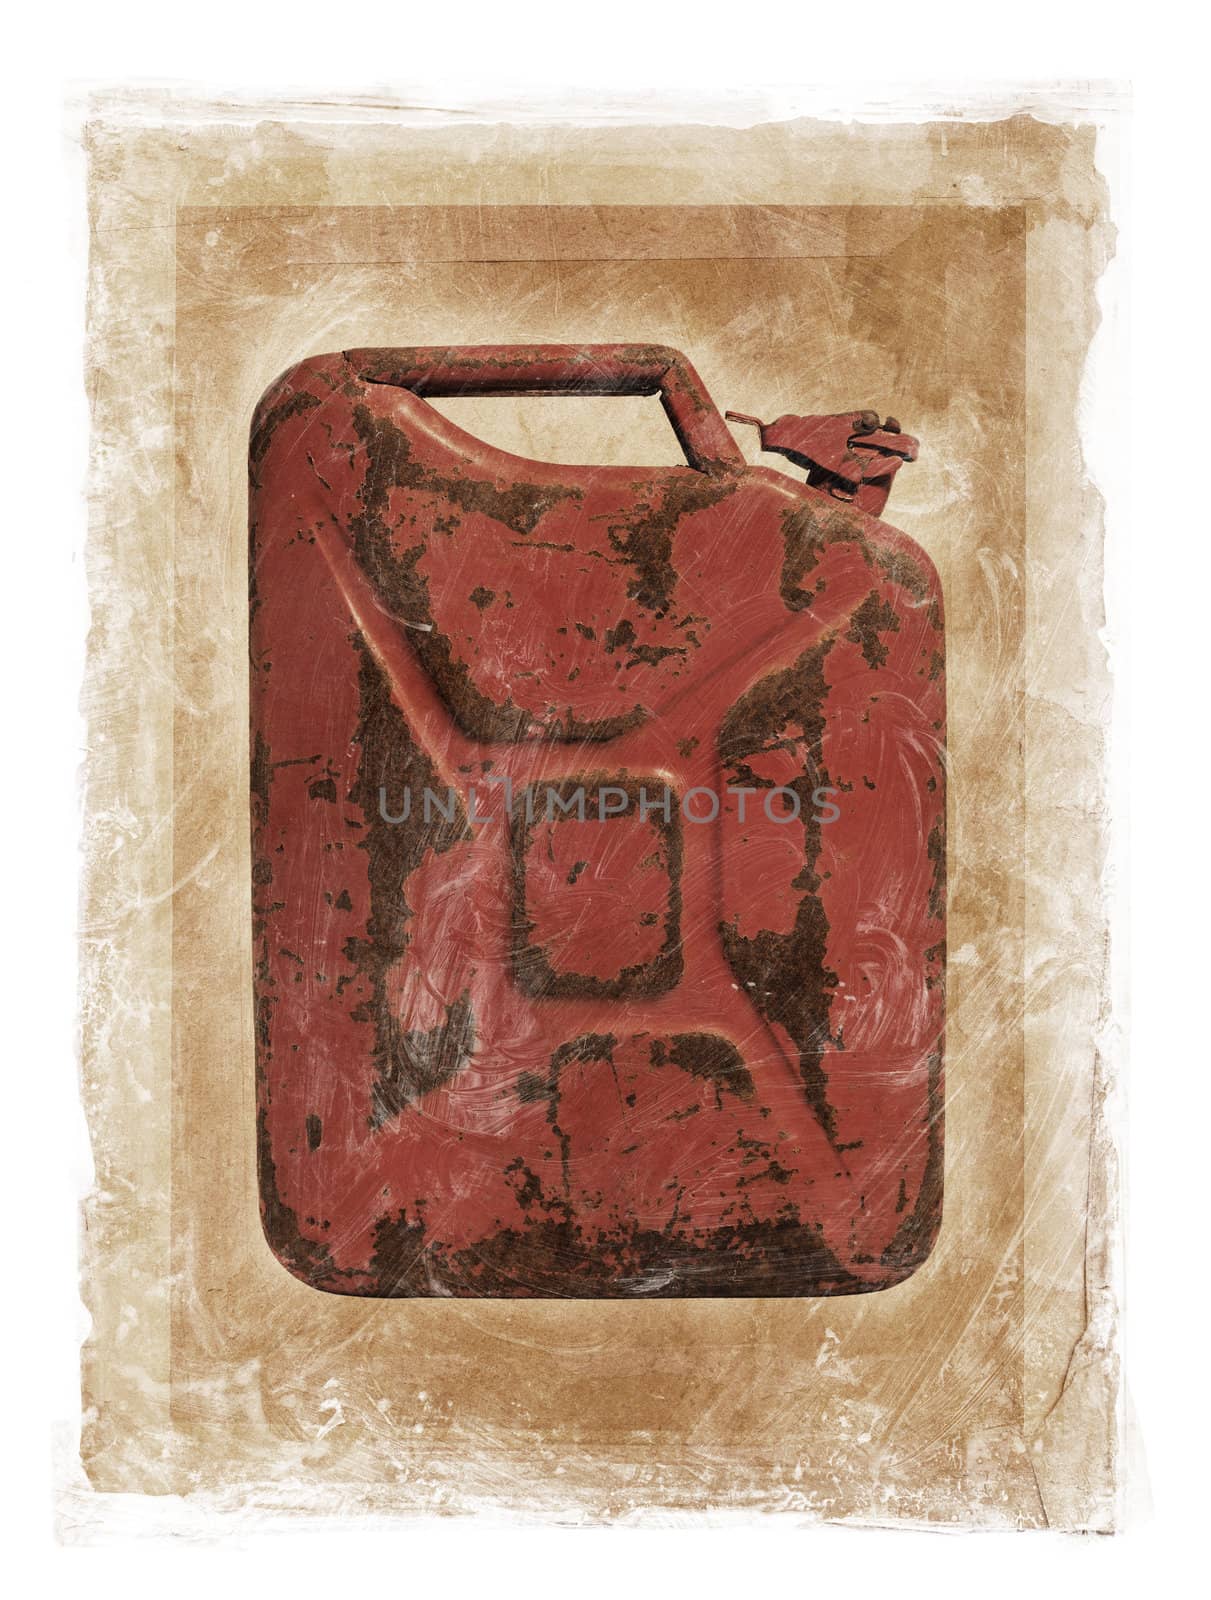 Grunge dirty photomanipulation of a jerry can fuel container.